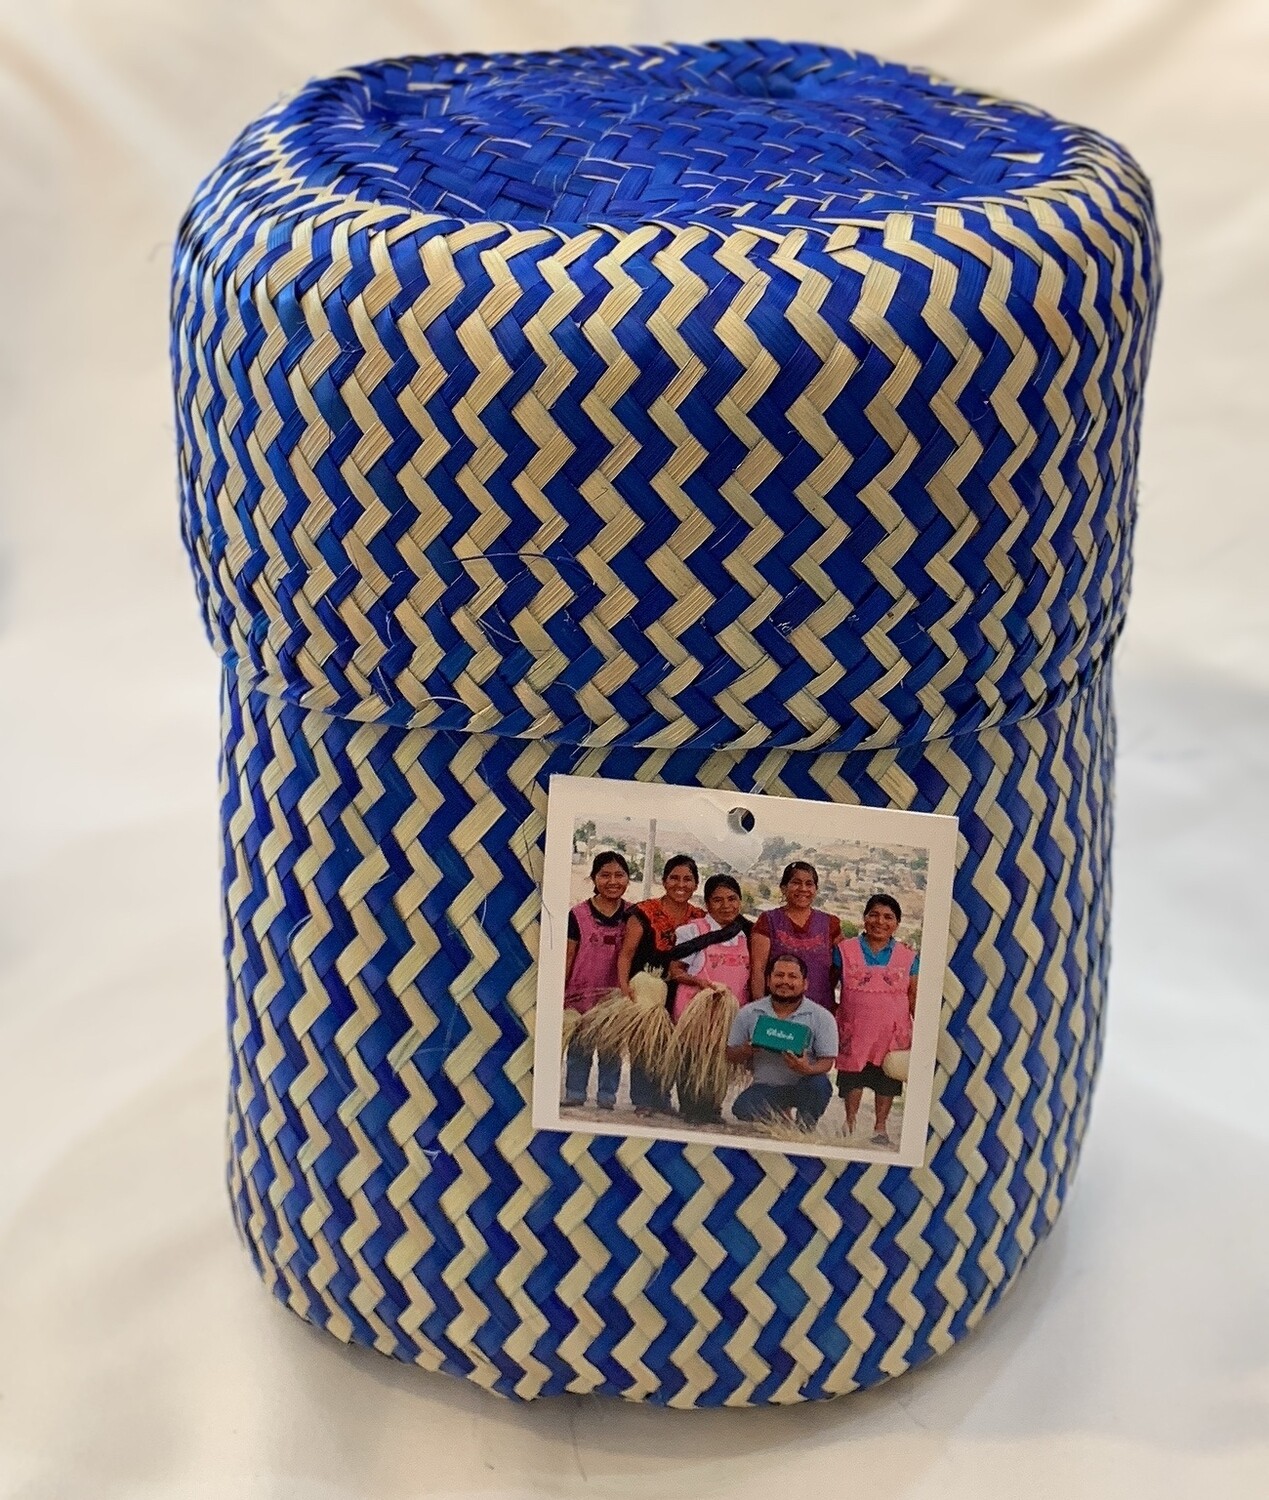 Globein Nature Tigre Handwoven Blue Basket from Mexico 6" d x 6.5" tall.